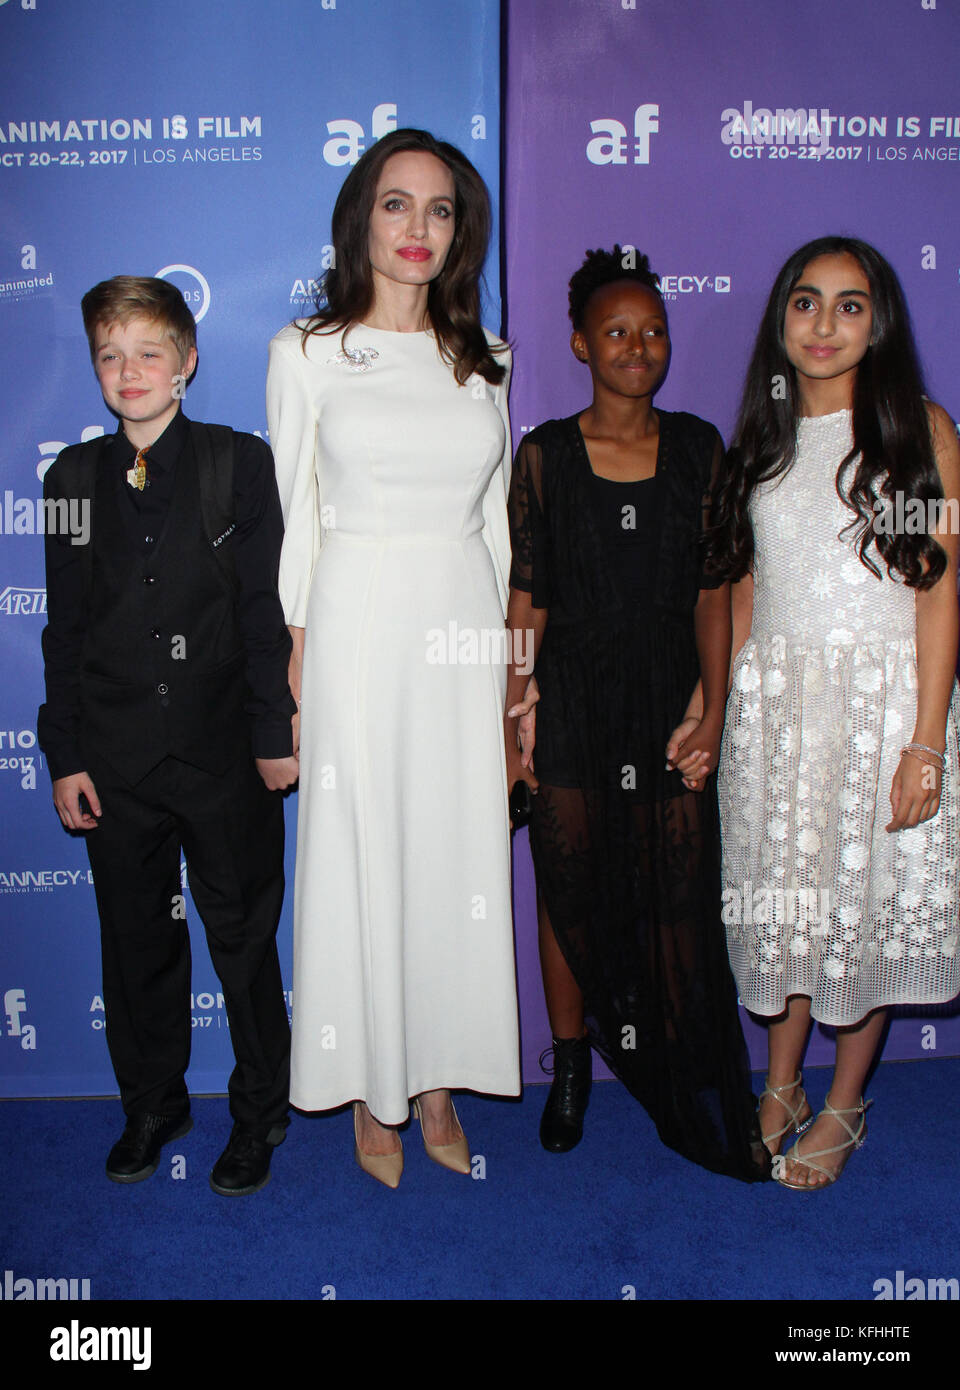 Hollywood, Ca. 20th Oct, 2017. Angelina Jolie, Saara Chaudry, Shiloh Jolie-Pitt, Zahara Jolie-Pitt, at Premiere Of Gkids' 'The Breadwinner' At TCL Chinese 6 Theatres in Hollywood, California on October 20, 2017. Credit: Faye Sadou/Media Punch/Alamy Live News Stock Photo